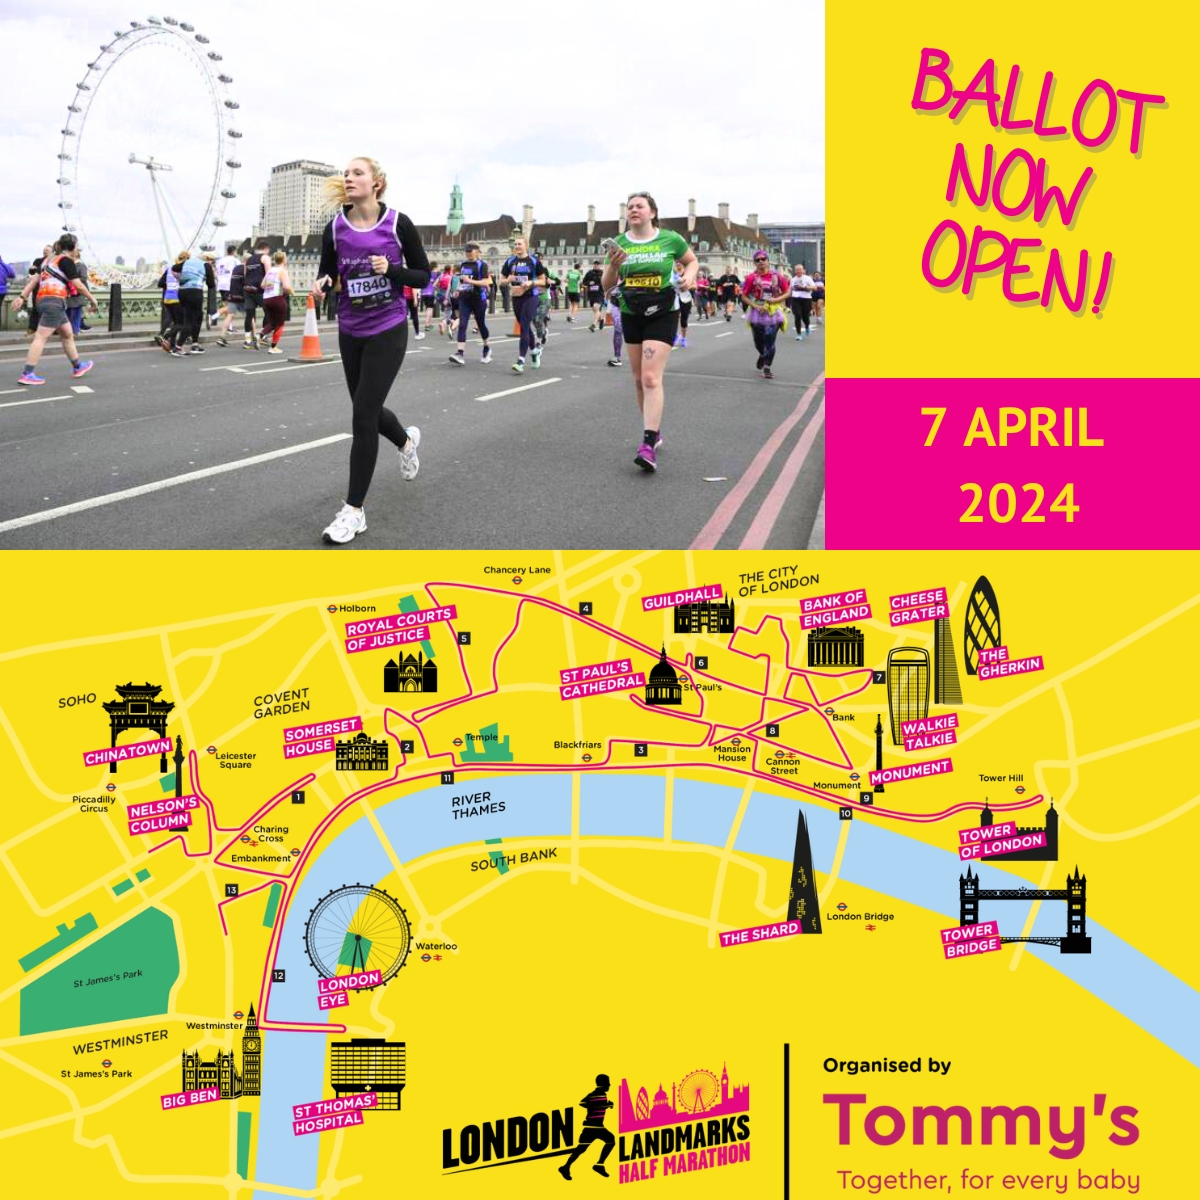 Have you got your place in the London Landmarks Half Marathon 2024?! 🎡👟

The ballot is currently open, but be quick... you have until 27 June to enter!

Enter here 👇
ow.ly/ZzjT50OQmcP

#LondonLandmarks #LondonLandmarks2024